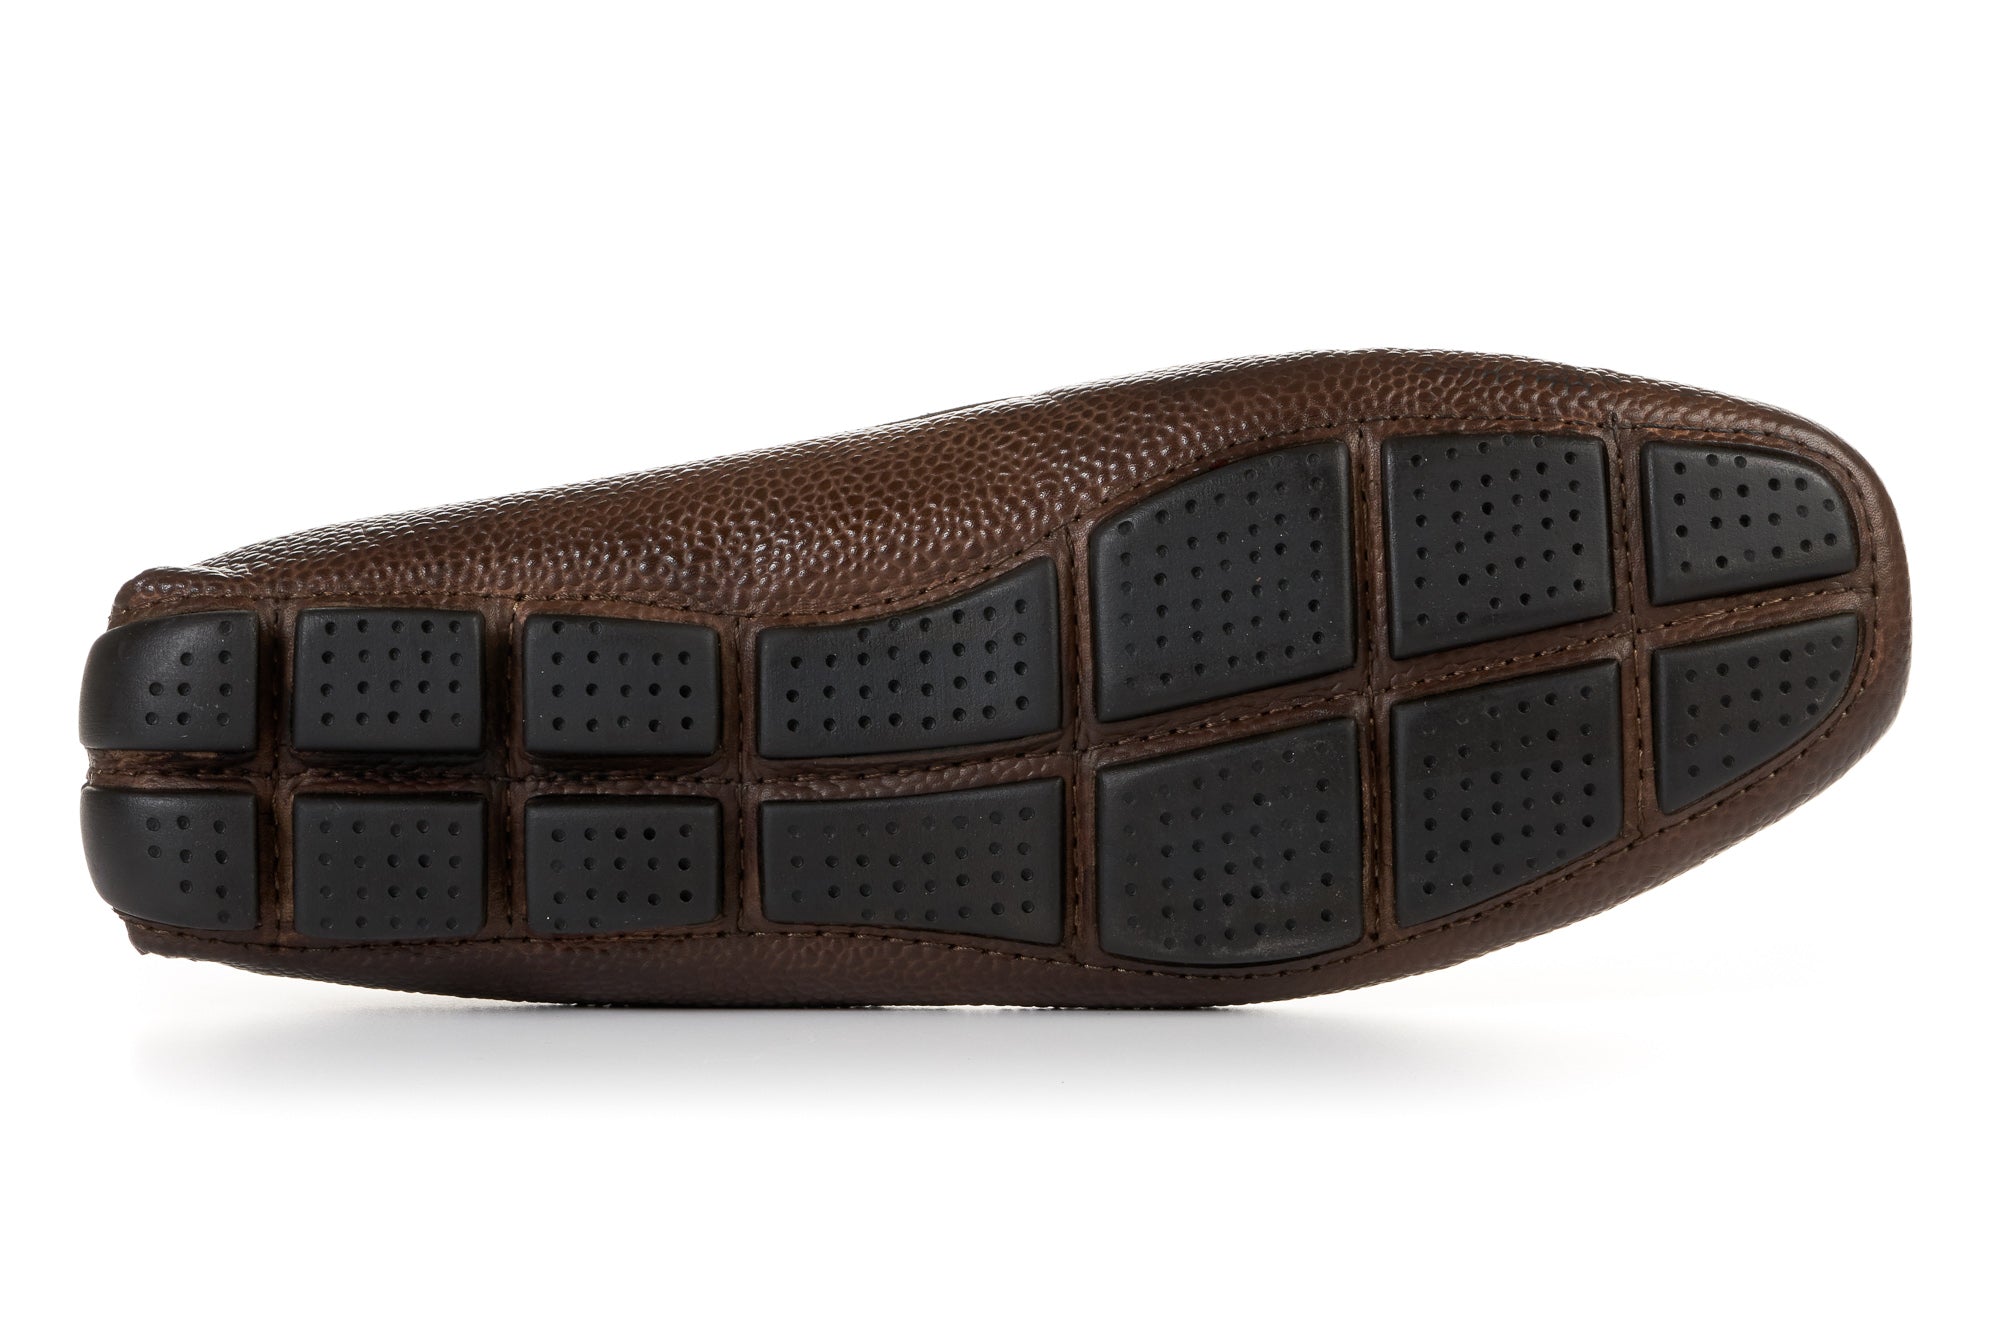 The McQueen Driving Loafer - Brown - Pebbled Leather